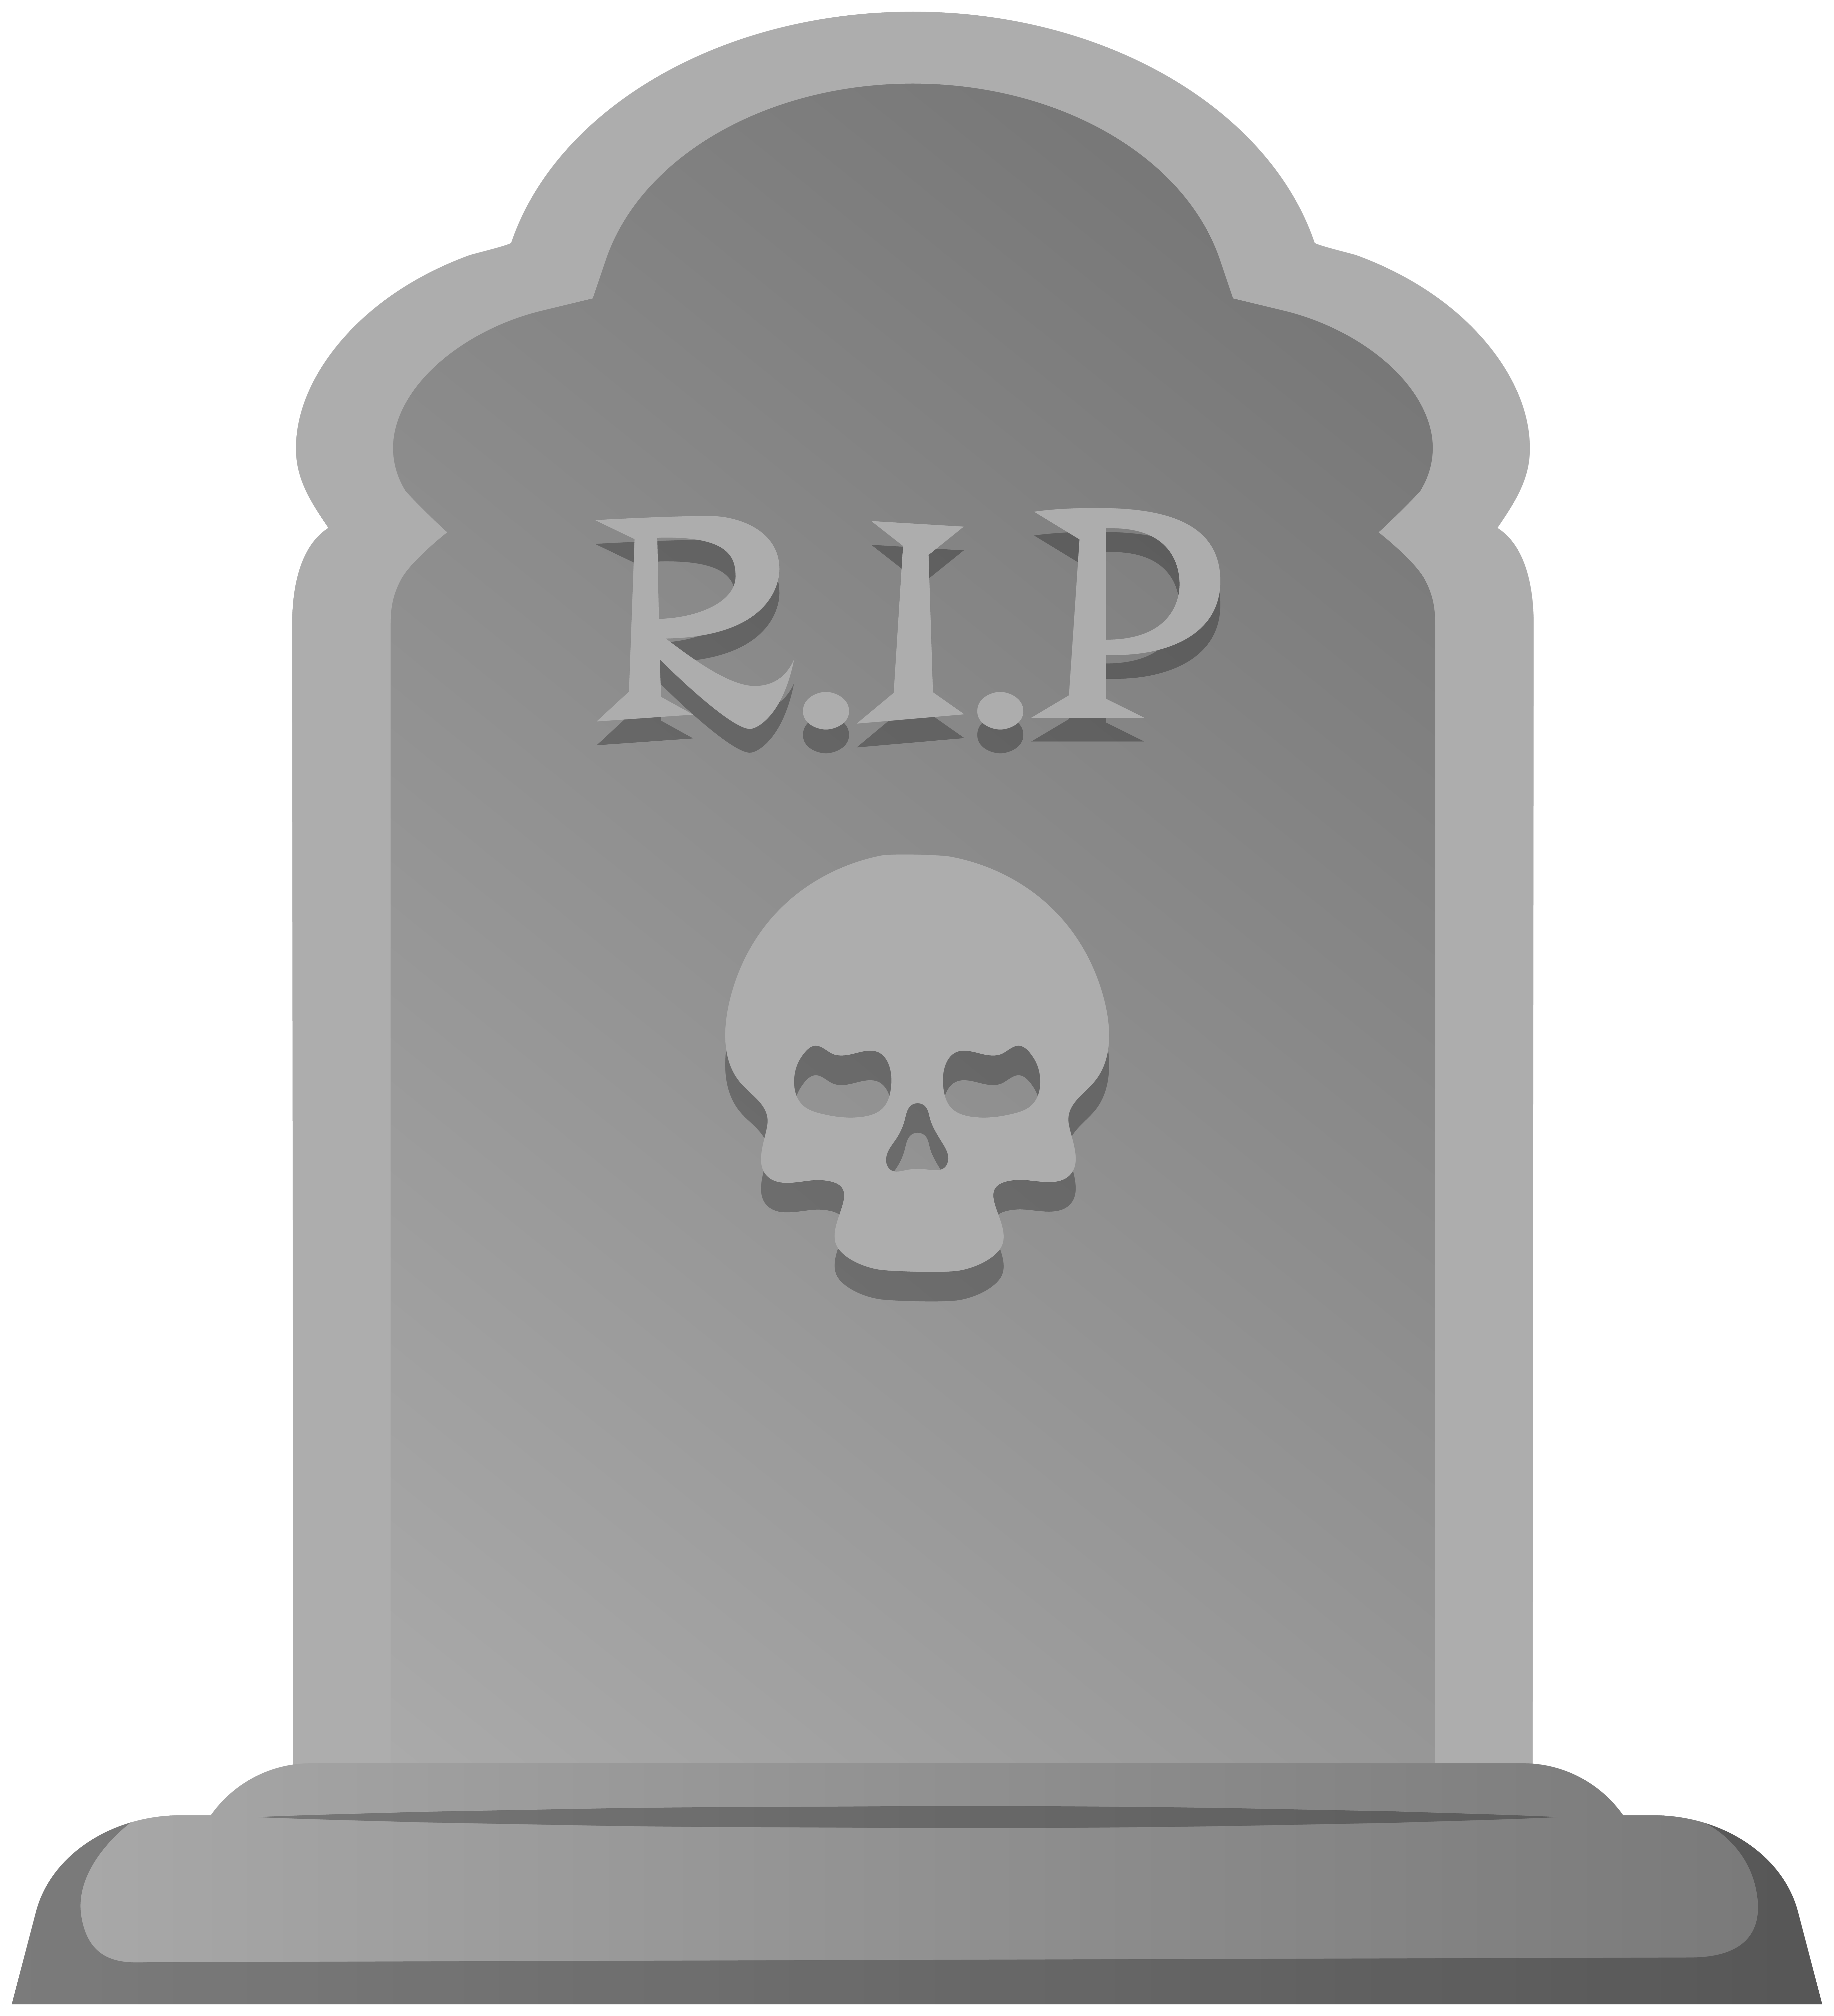 Rip Tombstone Fun For Halloween PNG Transparent Background, Free Download  #4475 - FreeIconsPNG